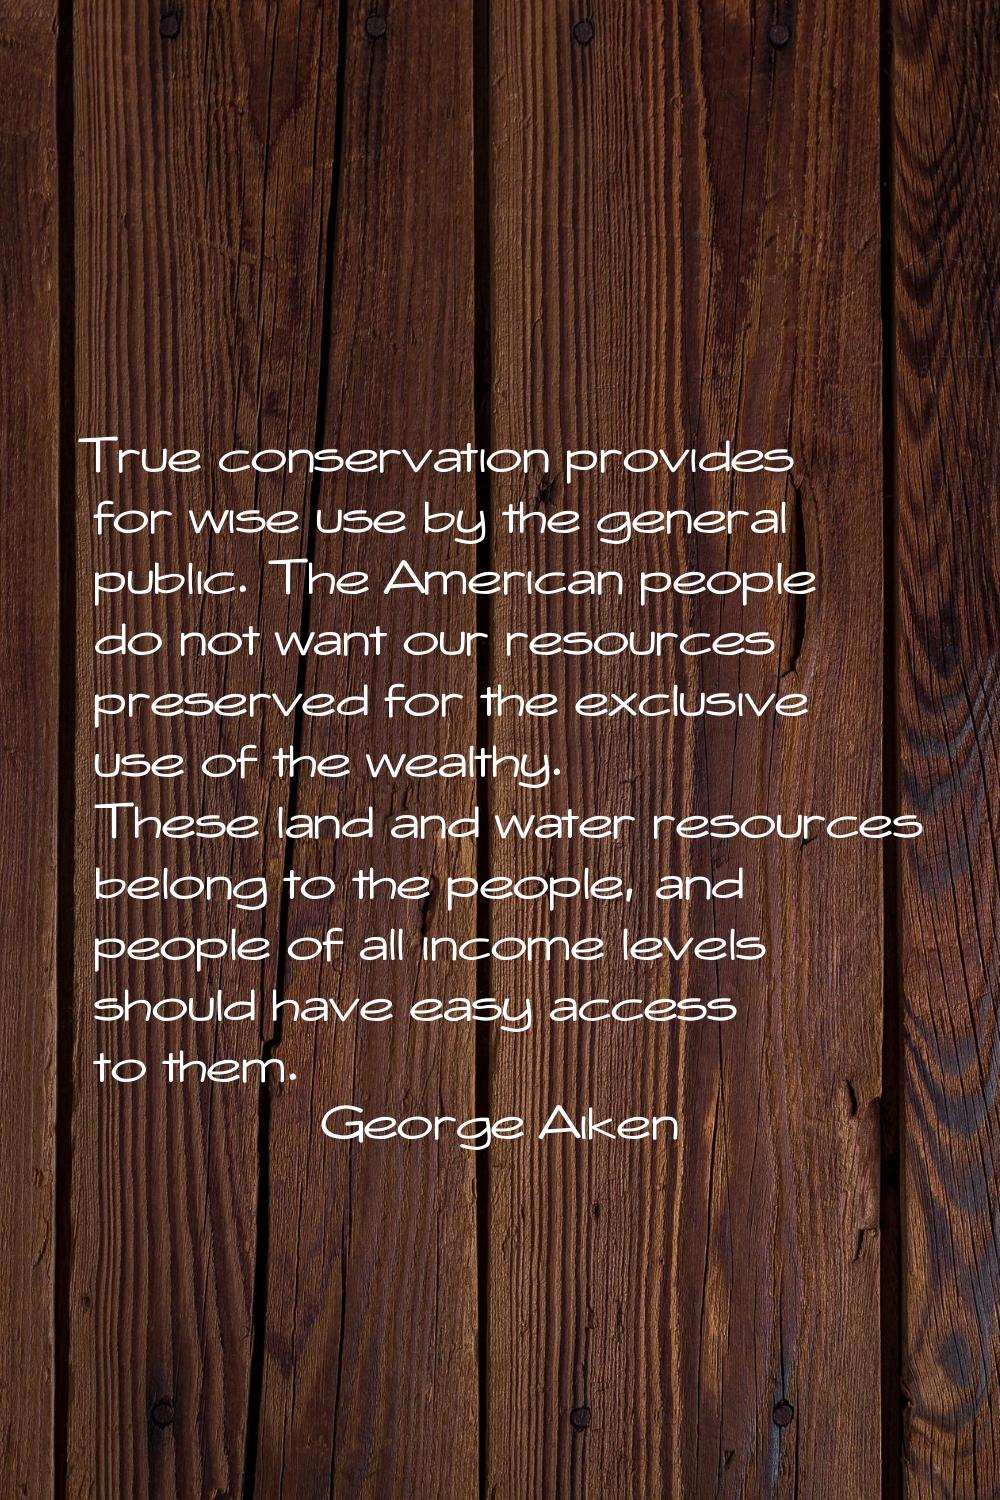 True conservation provides for wise use by the general public. The American people do not want our 